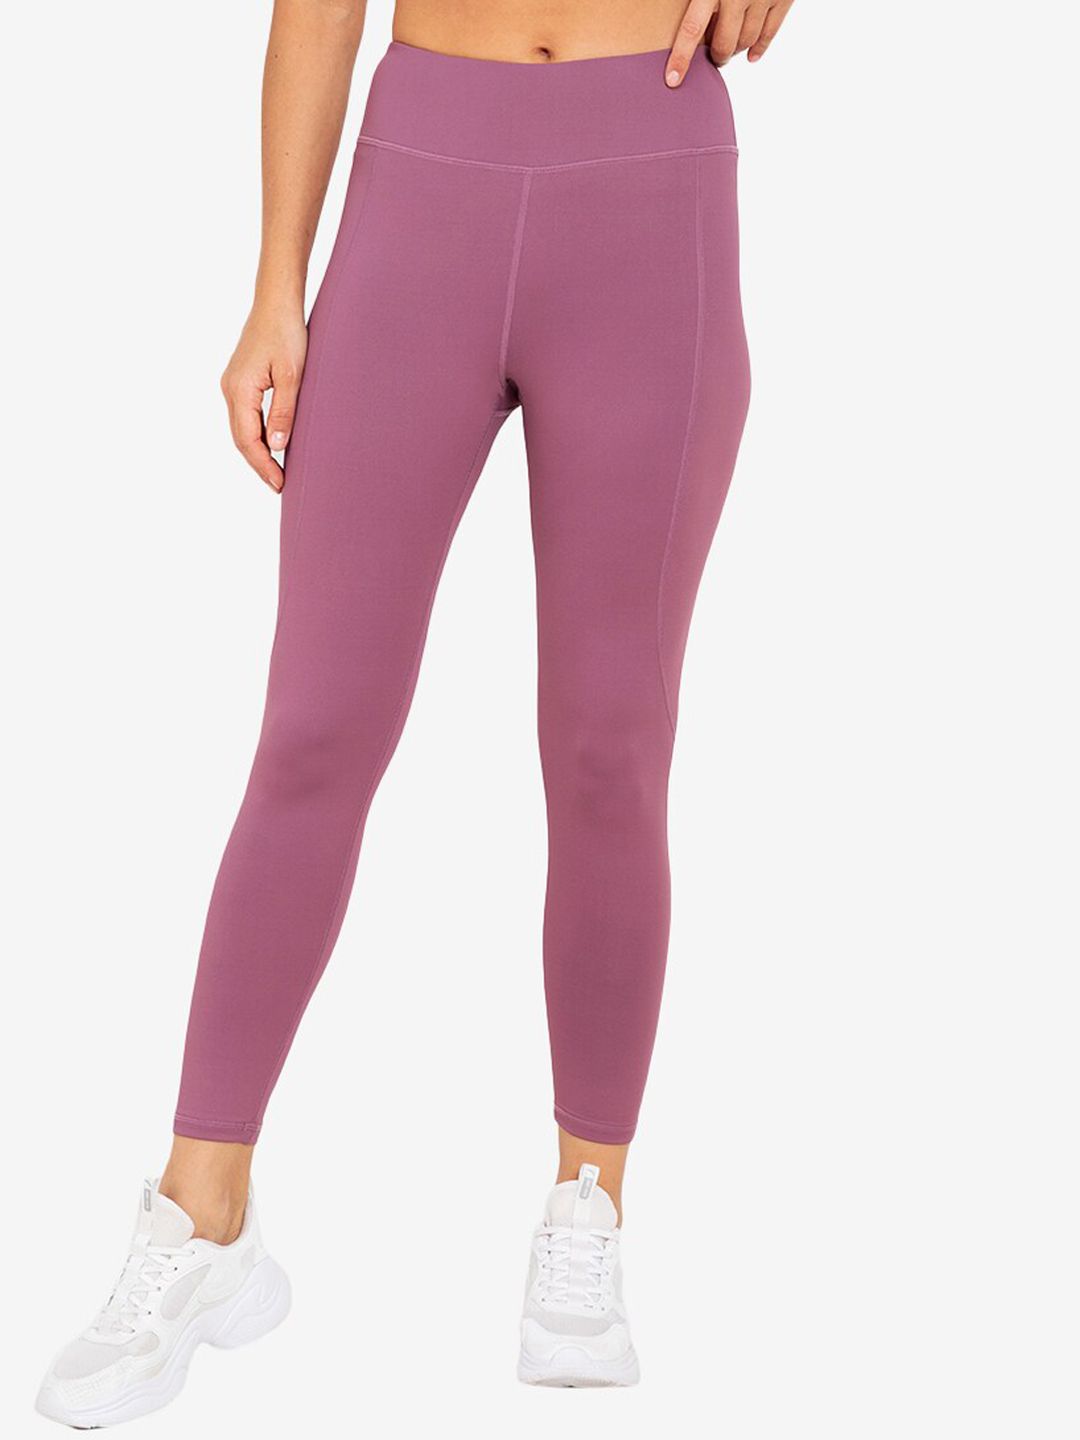 ZALORA ACTIVE Women Pink Solid Tights Price in India